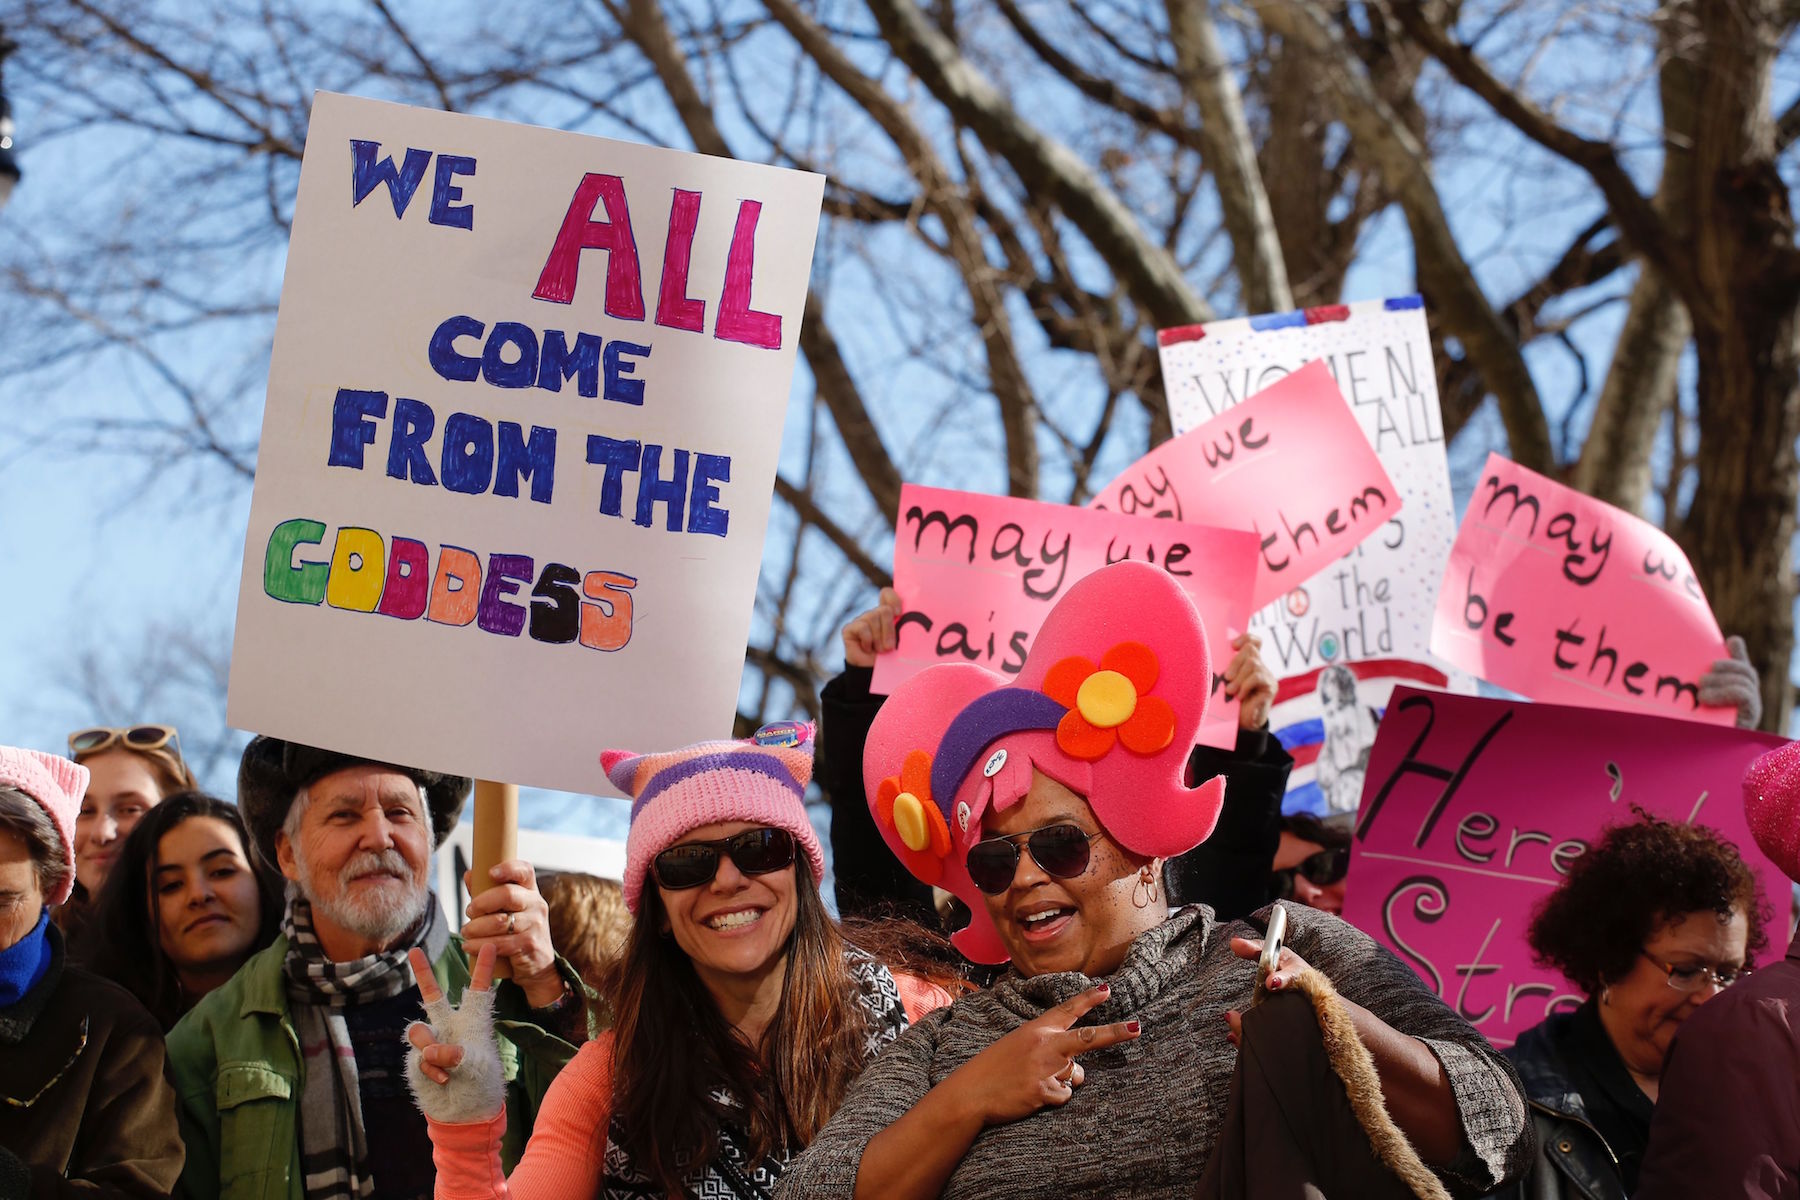 About 300K attend 2nd Women's March Chicago, exceeding last year, organizers say ...